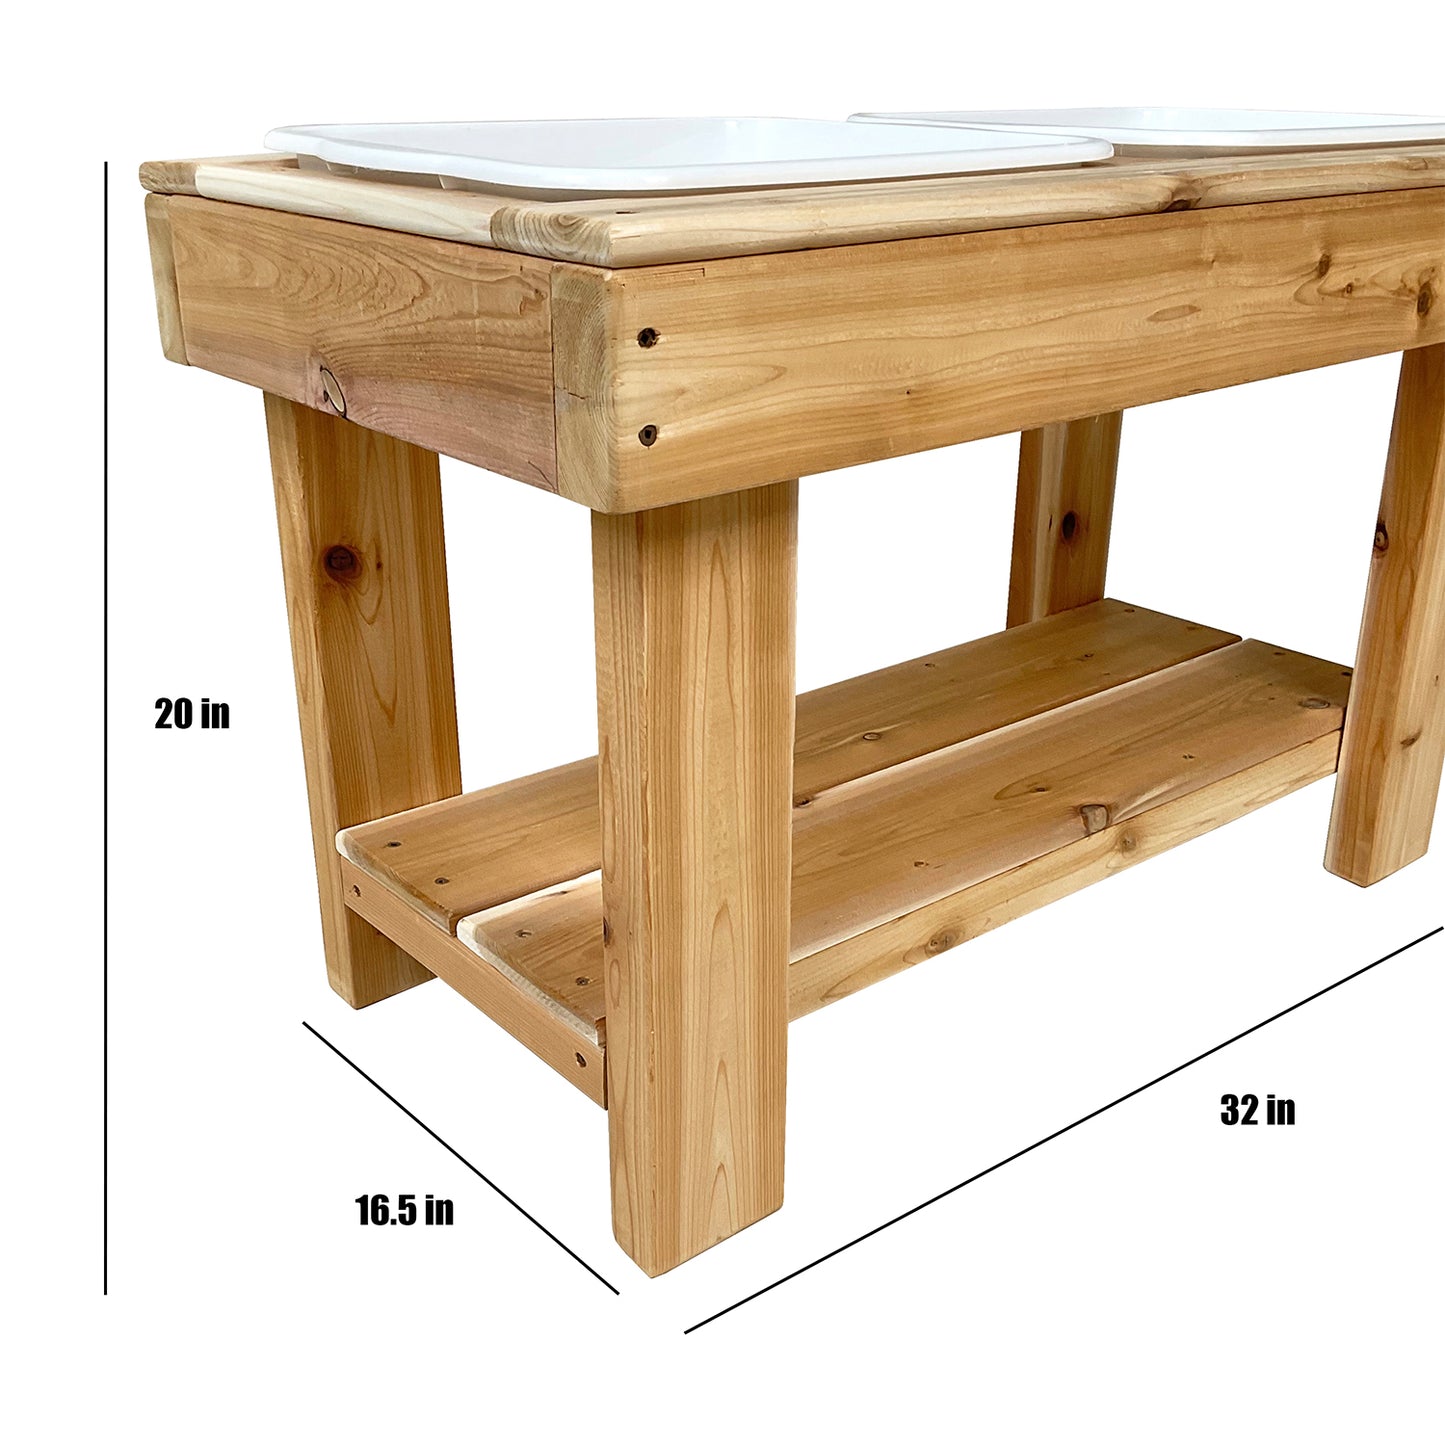 Cedar Sensory Play Table for Preschoolers - Just Playing (Made in Canada)